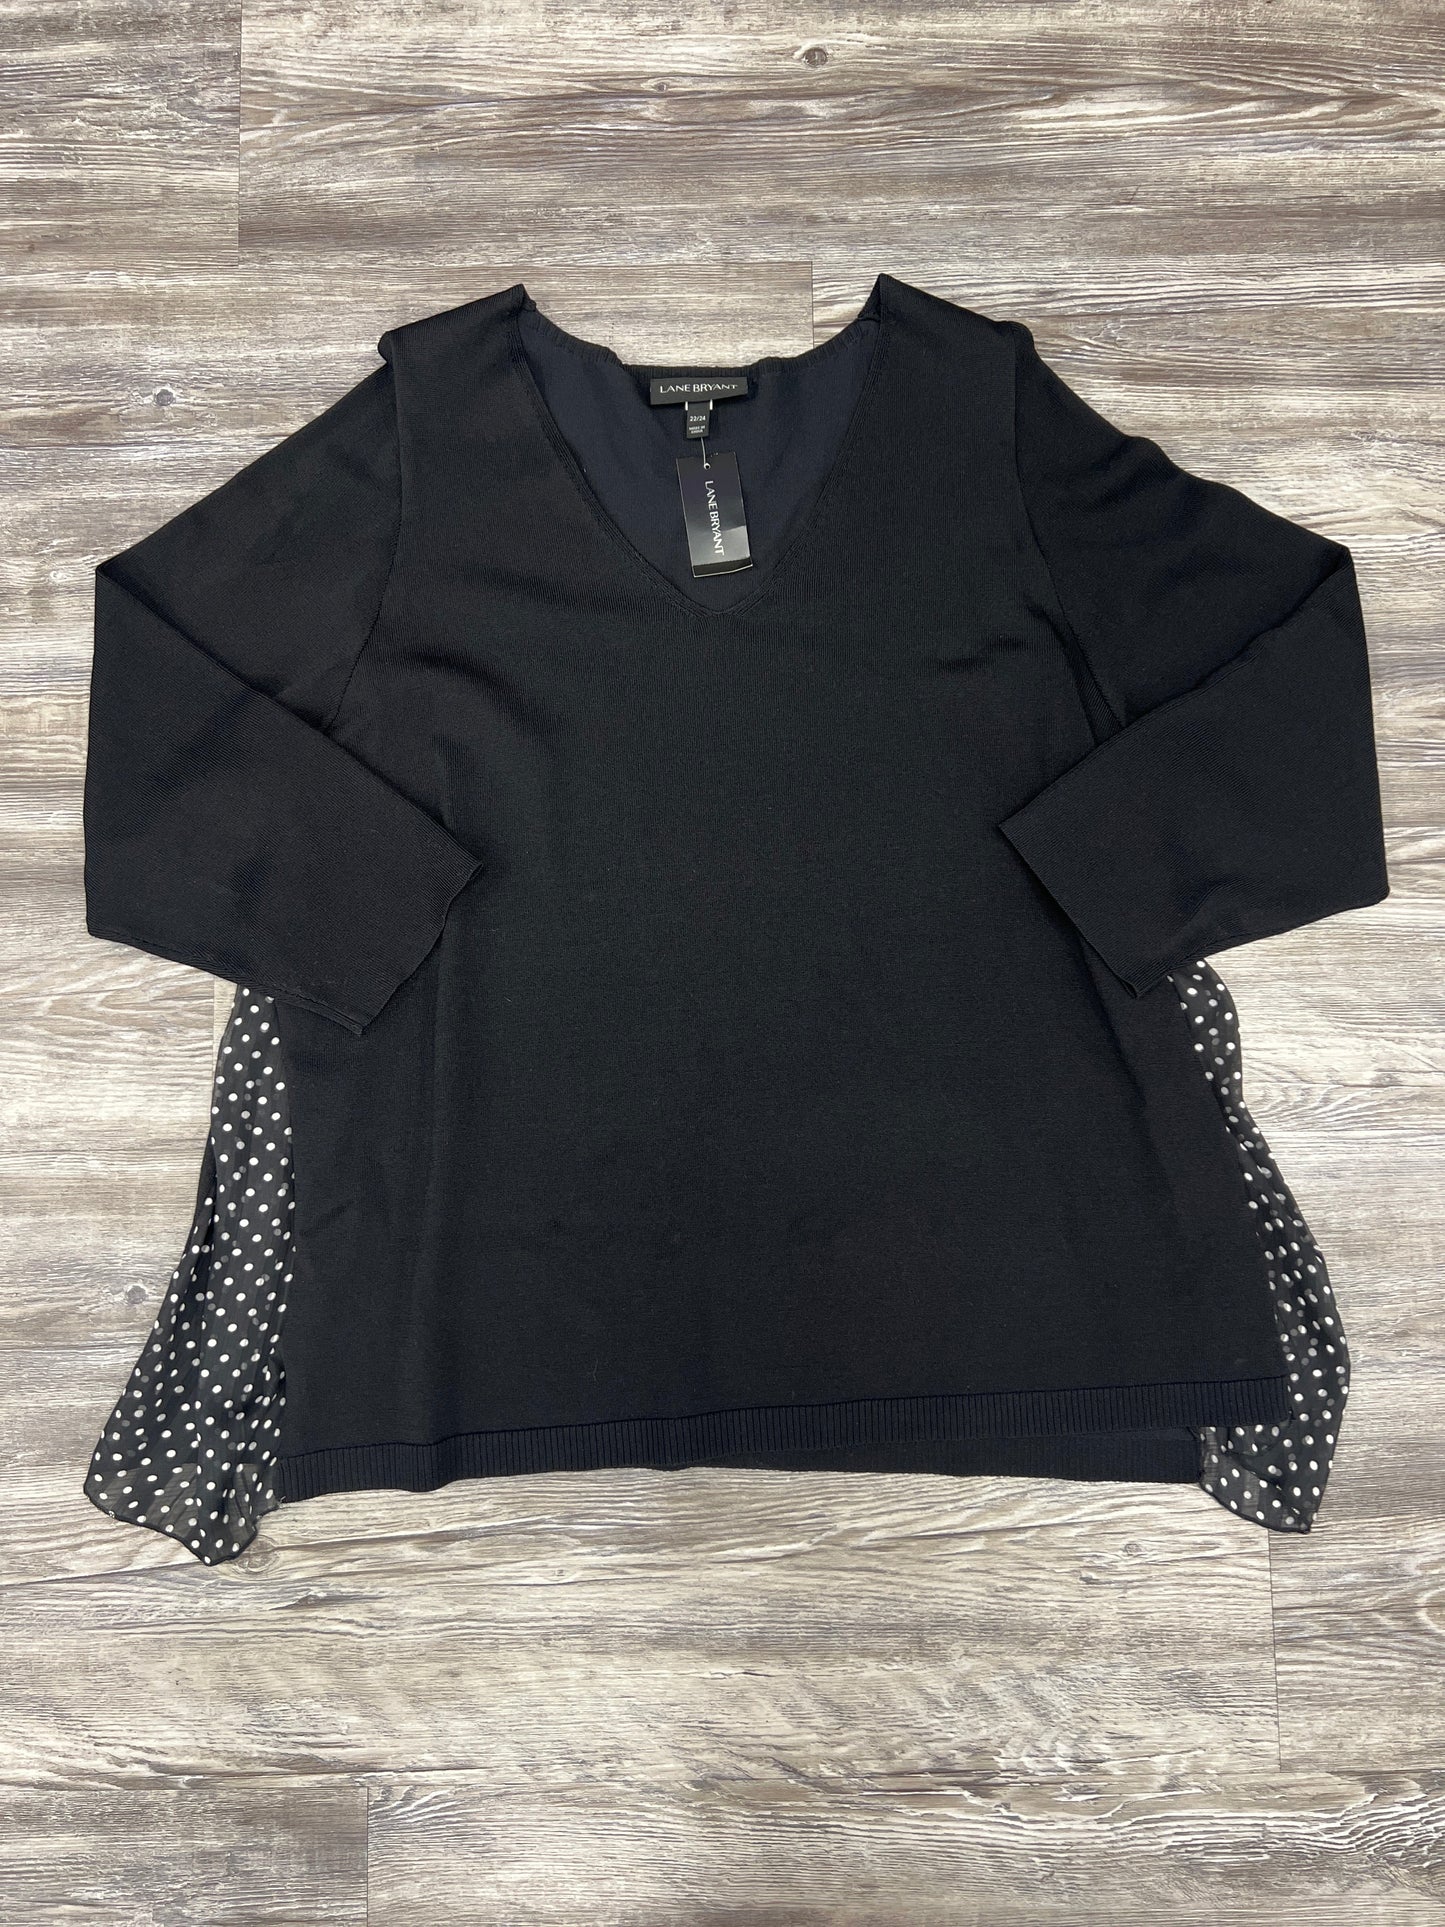 Top Long Sleeve By Lane Bryant Size: 3x